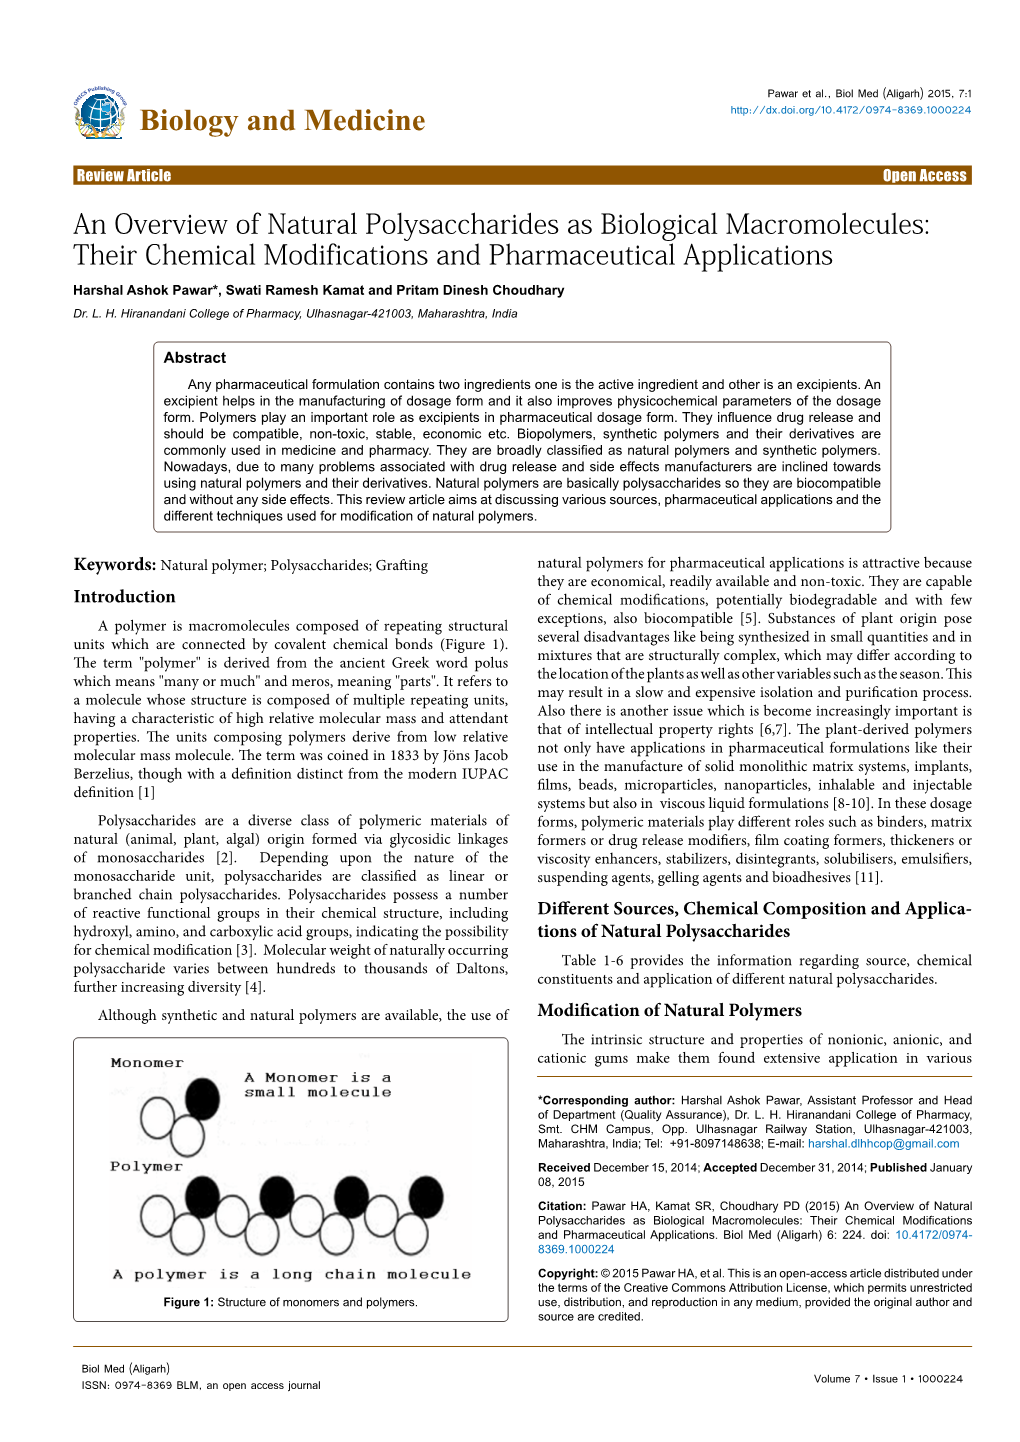 An Overview of Natural Polysaccharides As Biological Macromolecules: Their Chemical Modifications and Pharmaceutical Applications